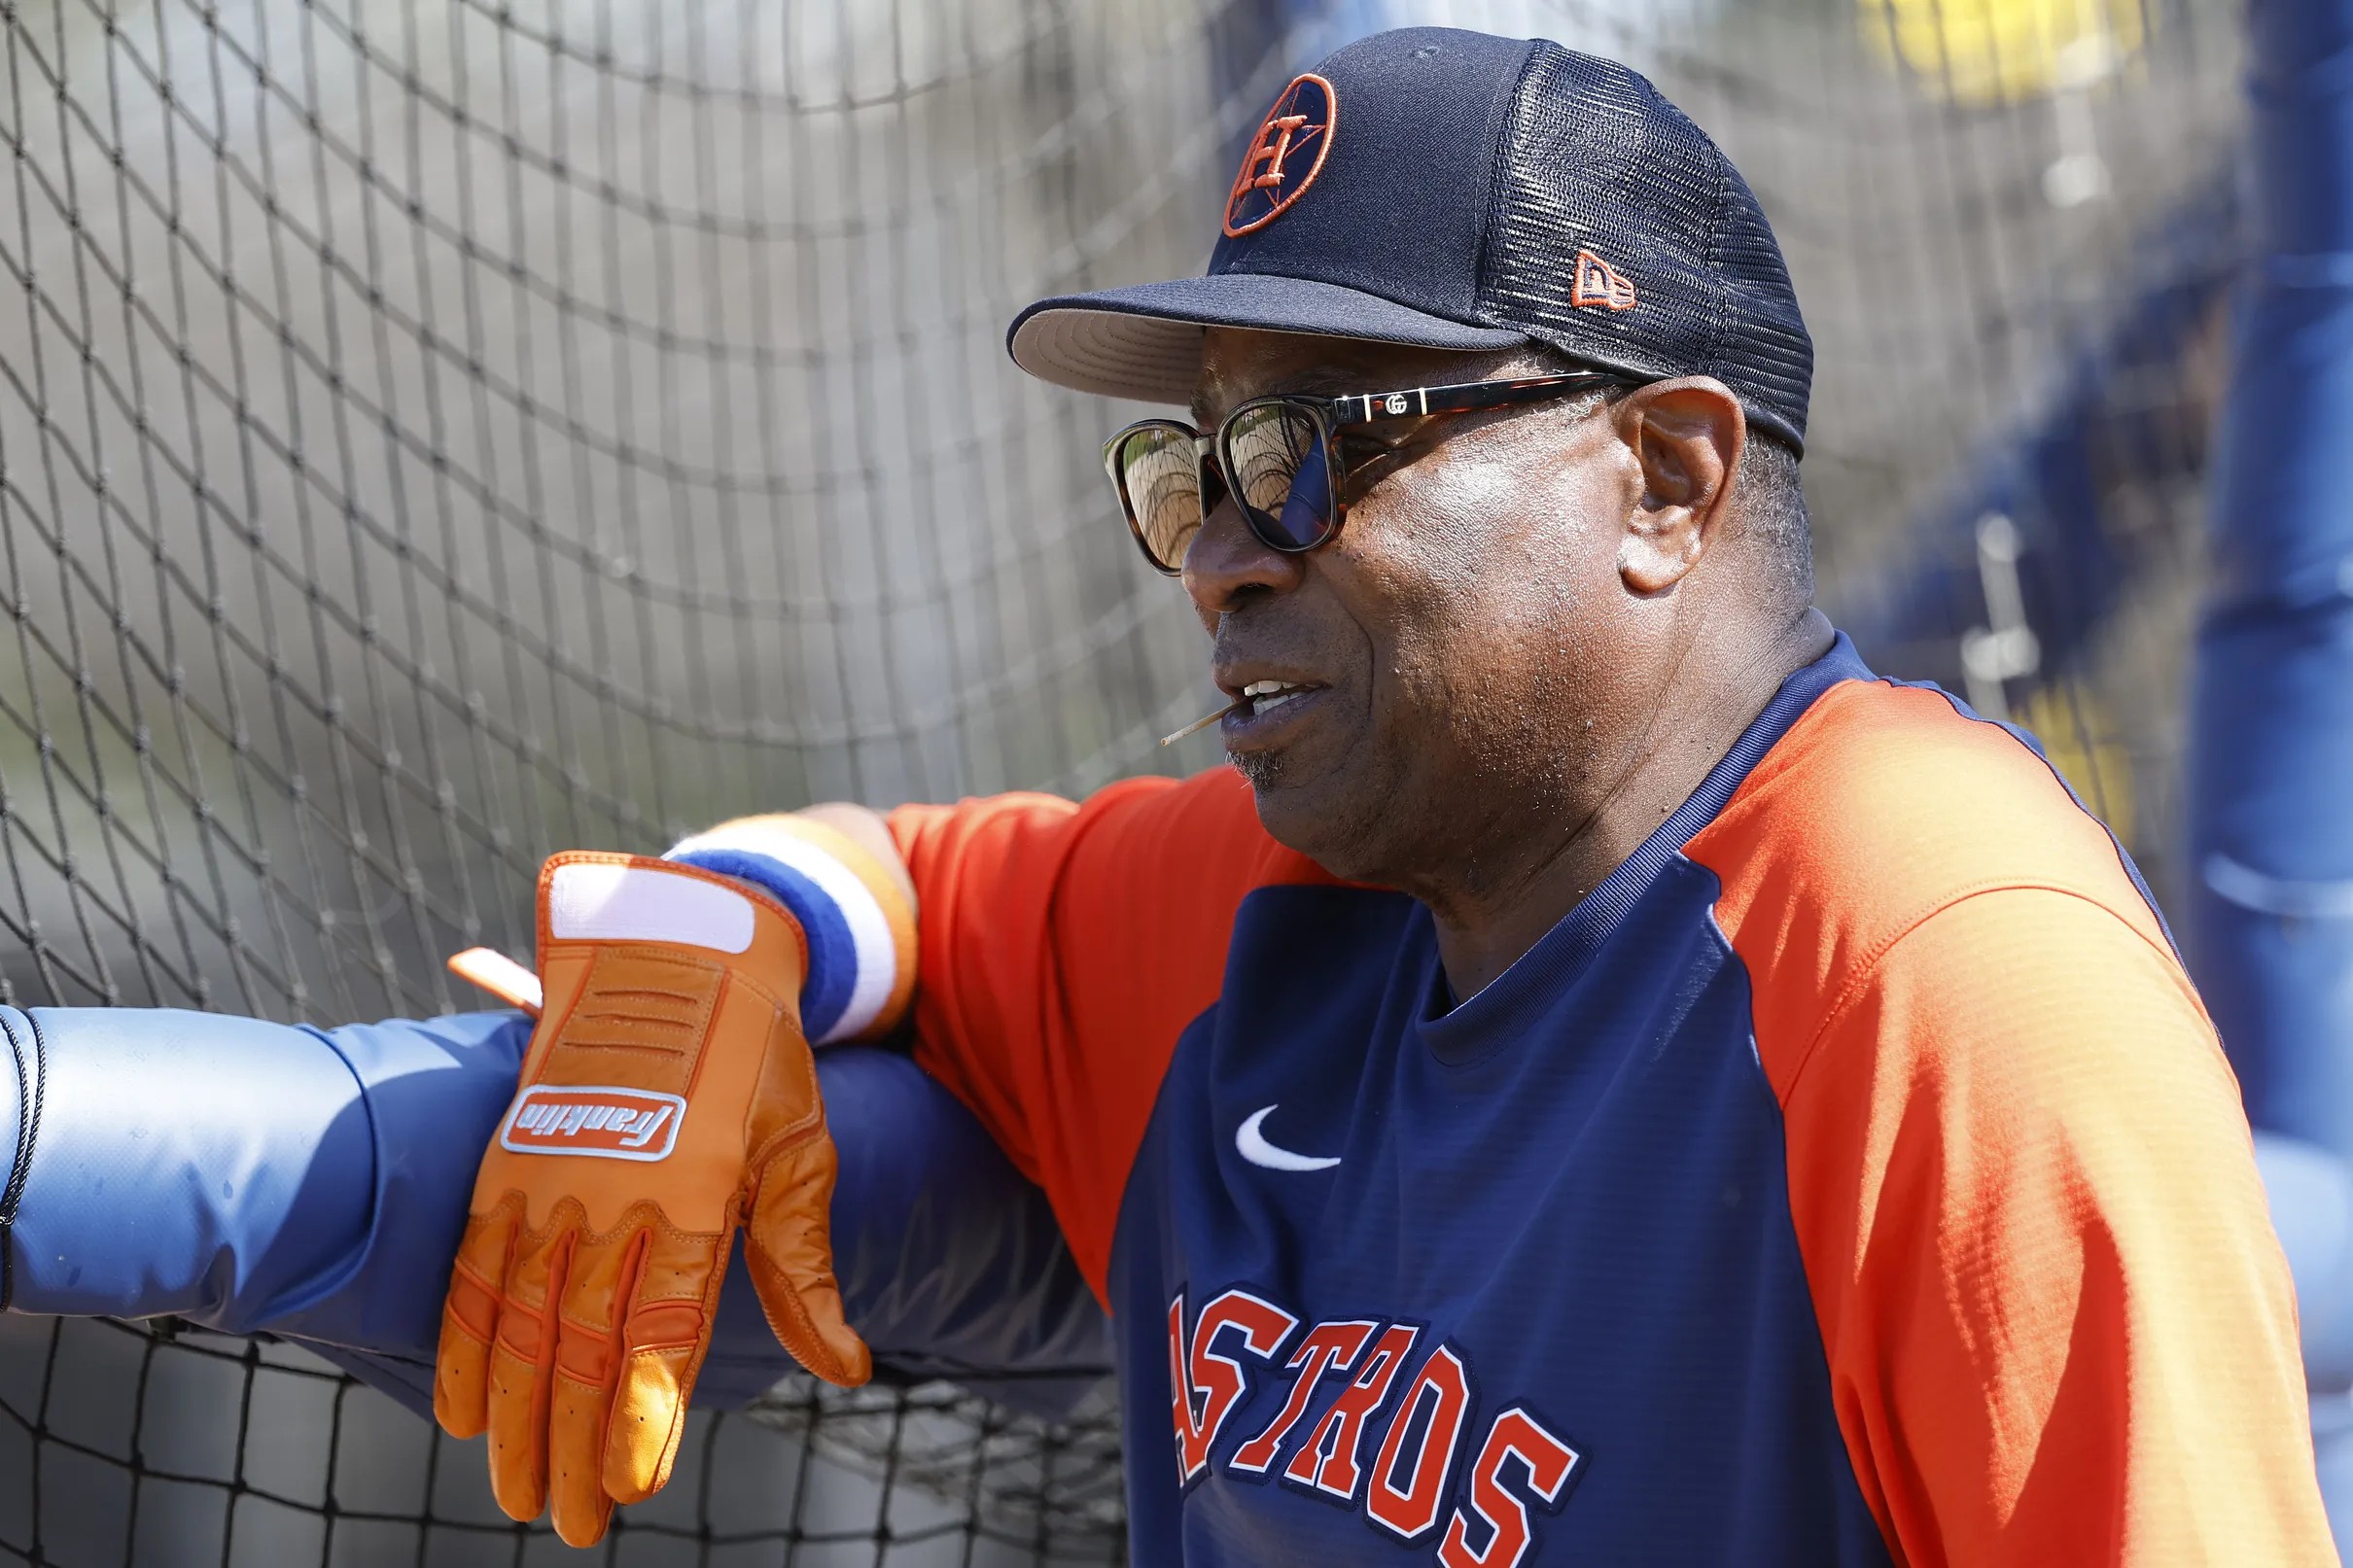 10 Things to Watch for This Spring Training (Astros Spring Training